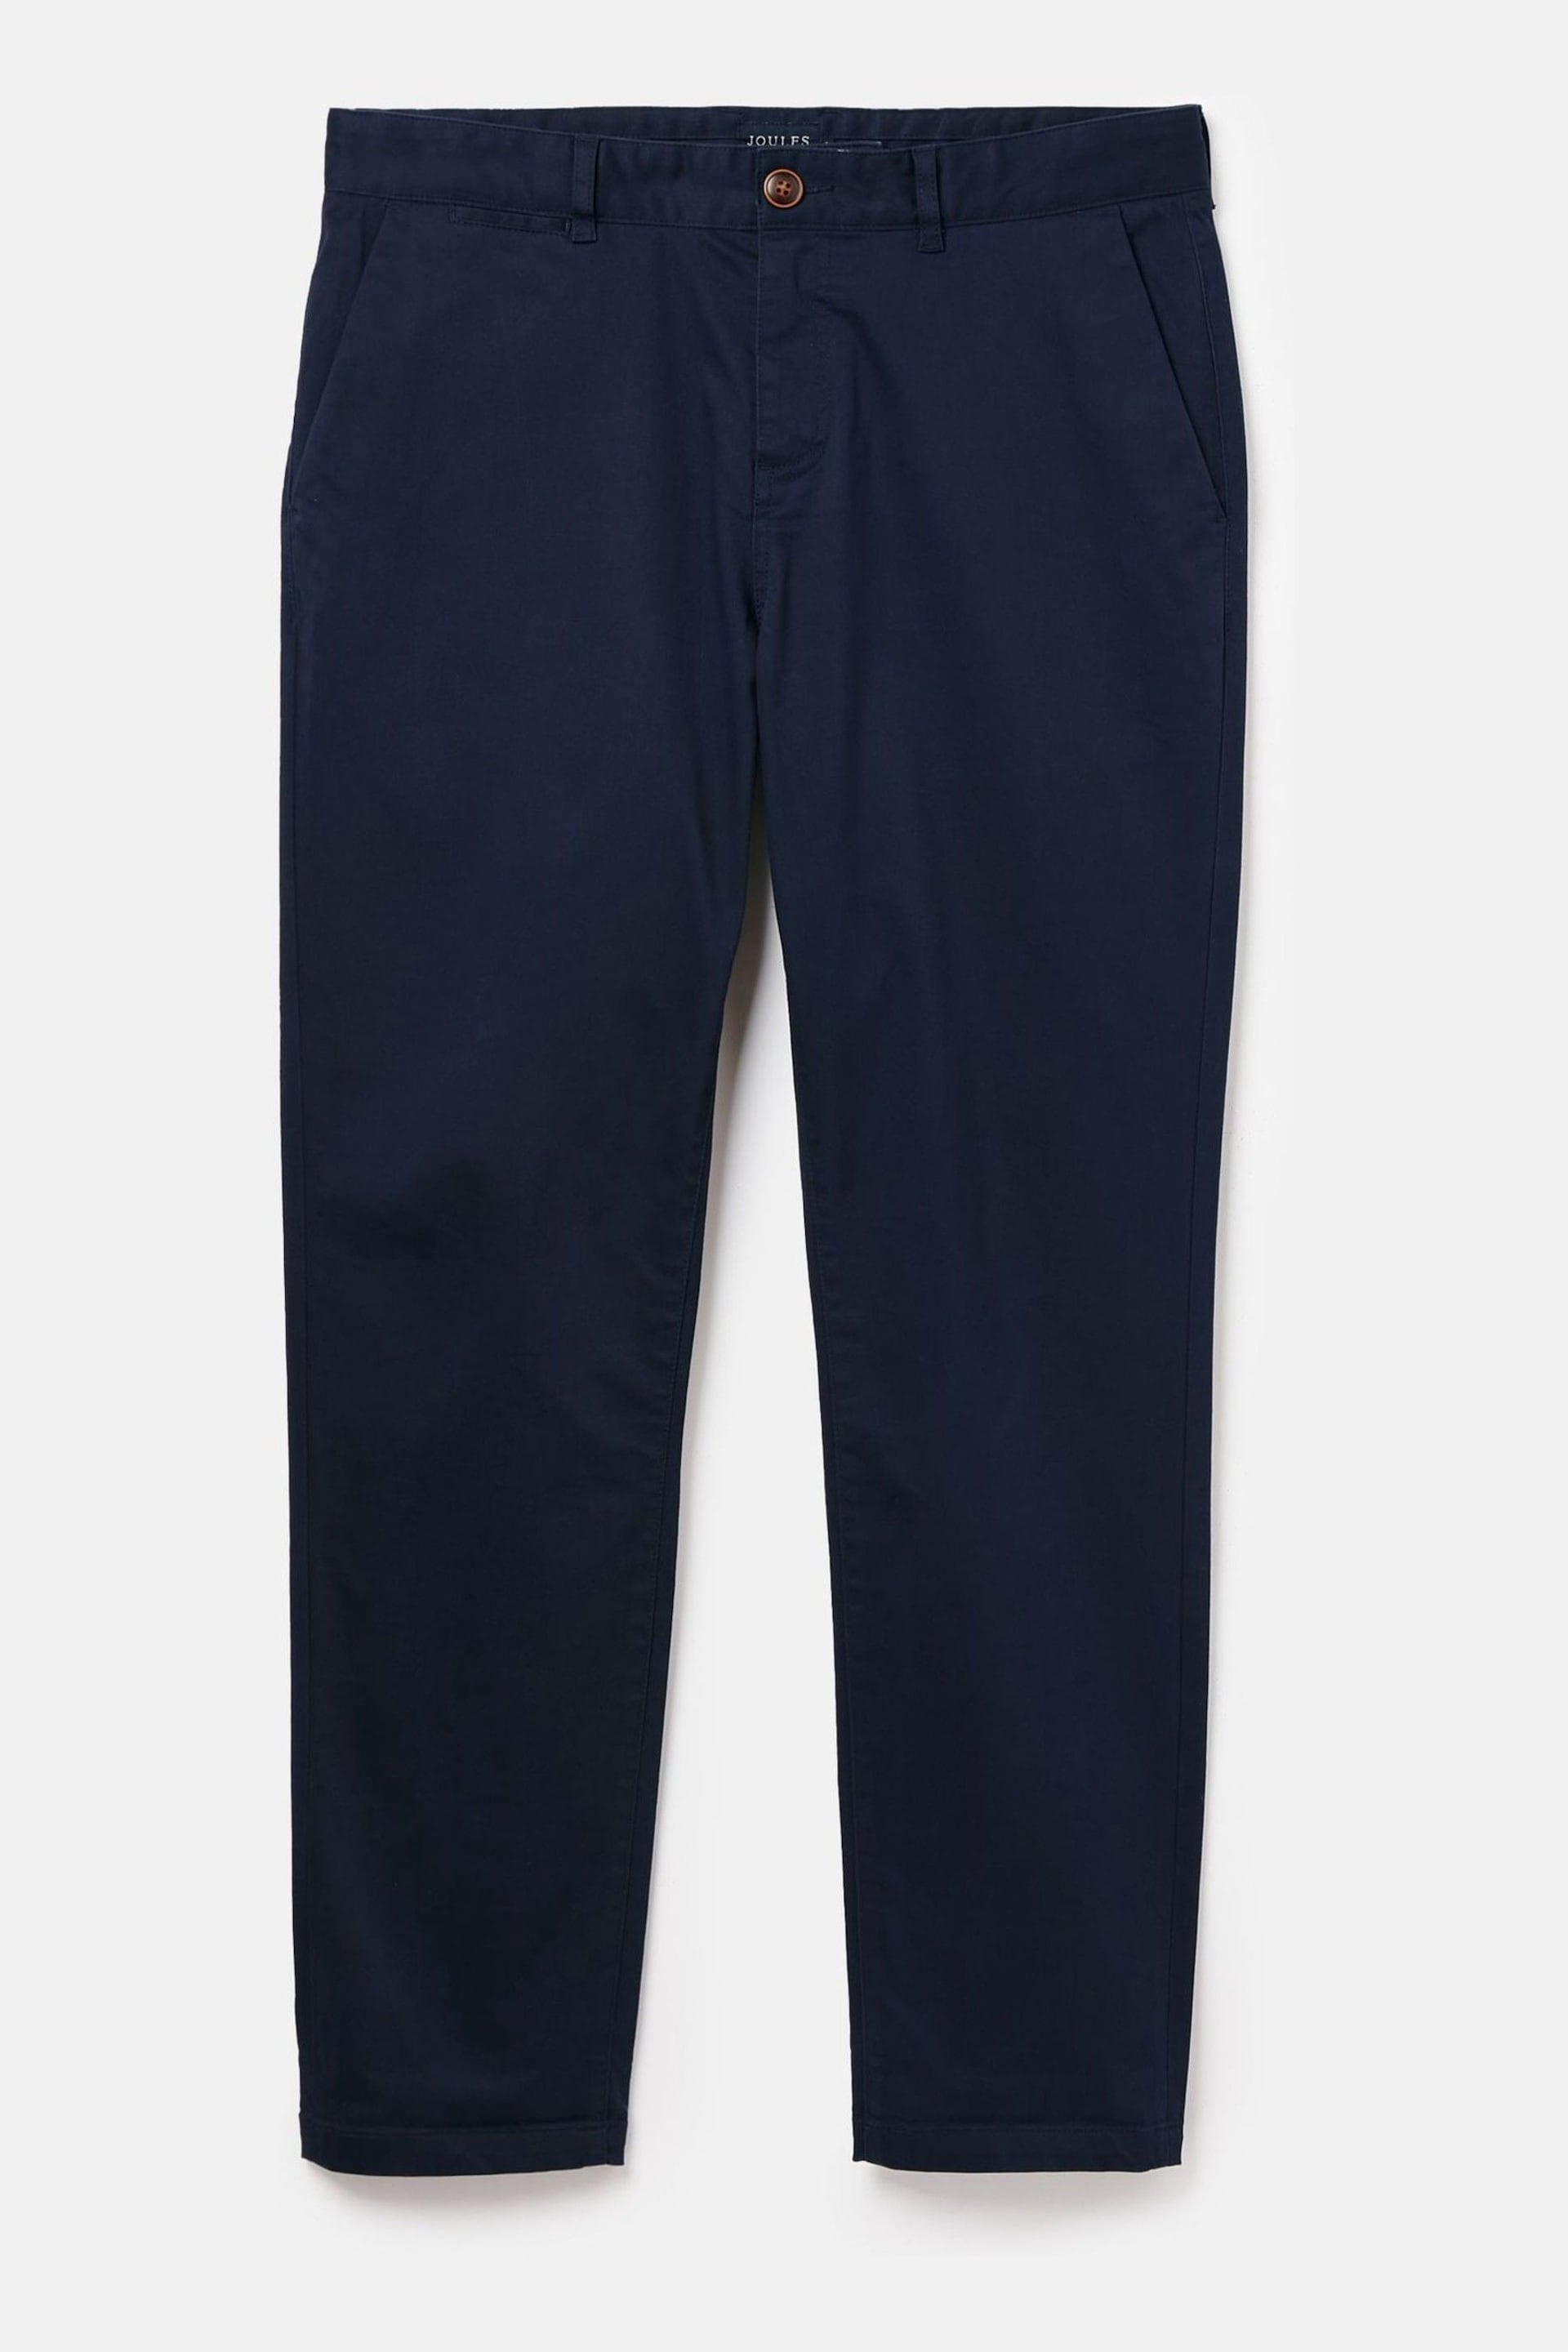 Joules Stamford Navy Blue Slim Fit Chinos - Image 6 of 6